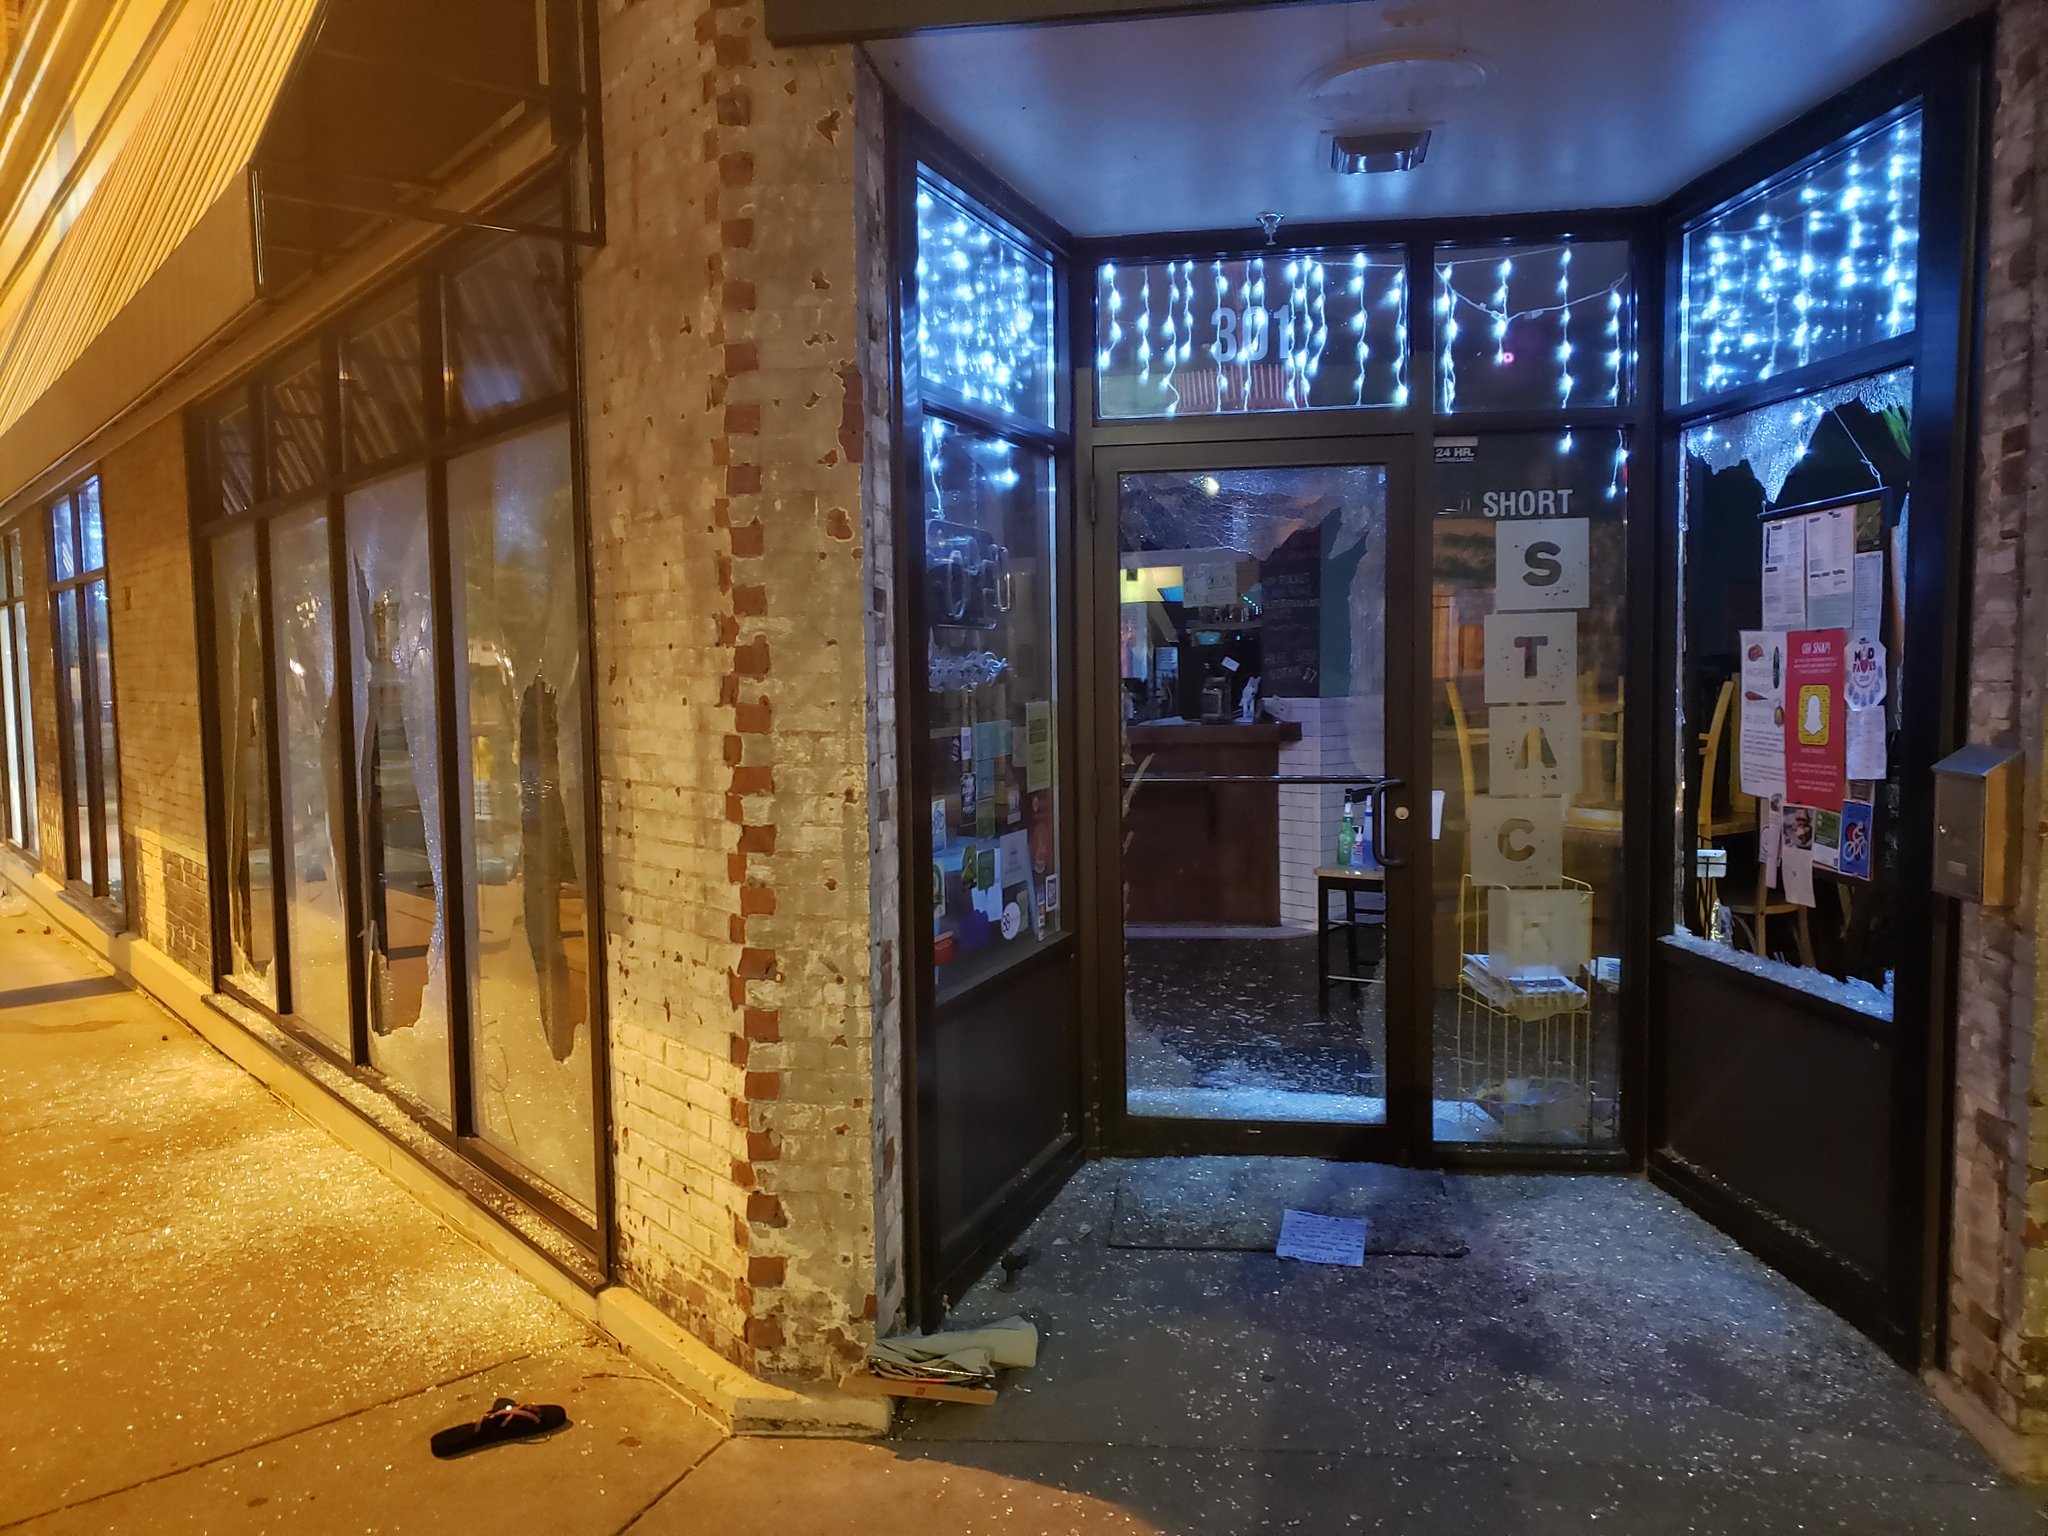 Protesters broke some windows of businesses on State Street in Madison during the rally on Monday night, June 1, 2020, around the Capitol Square.